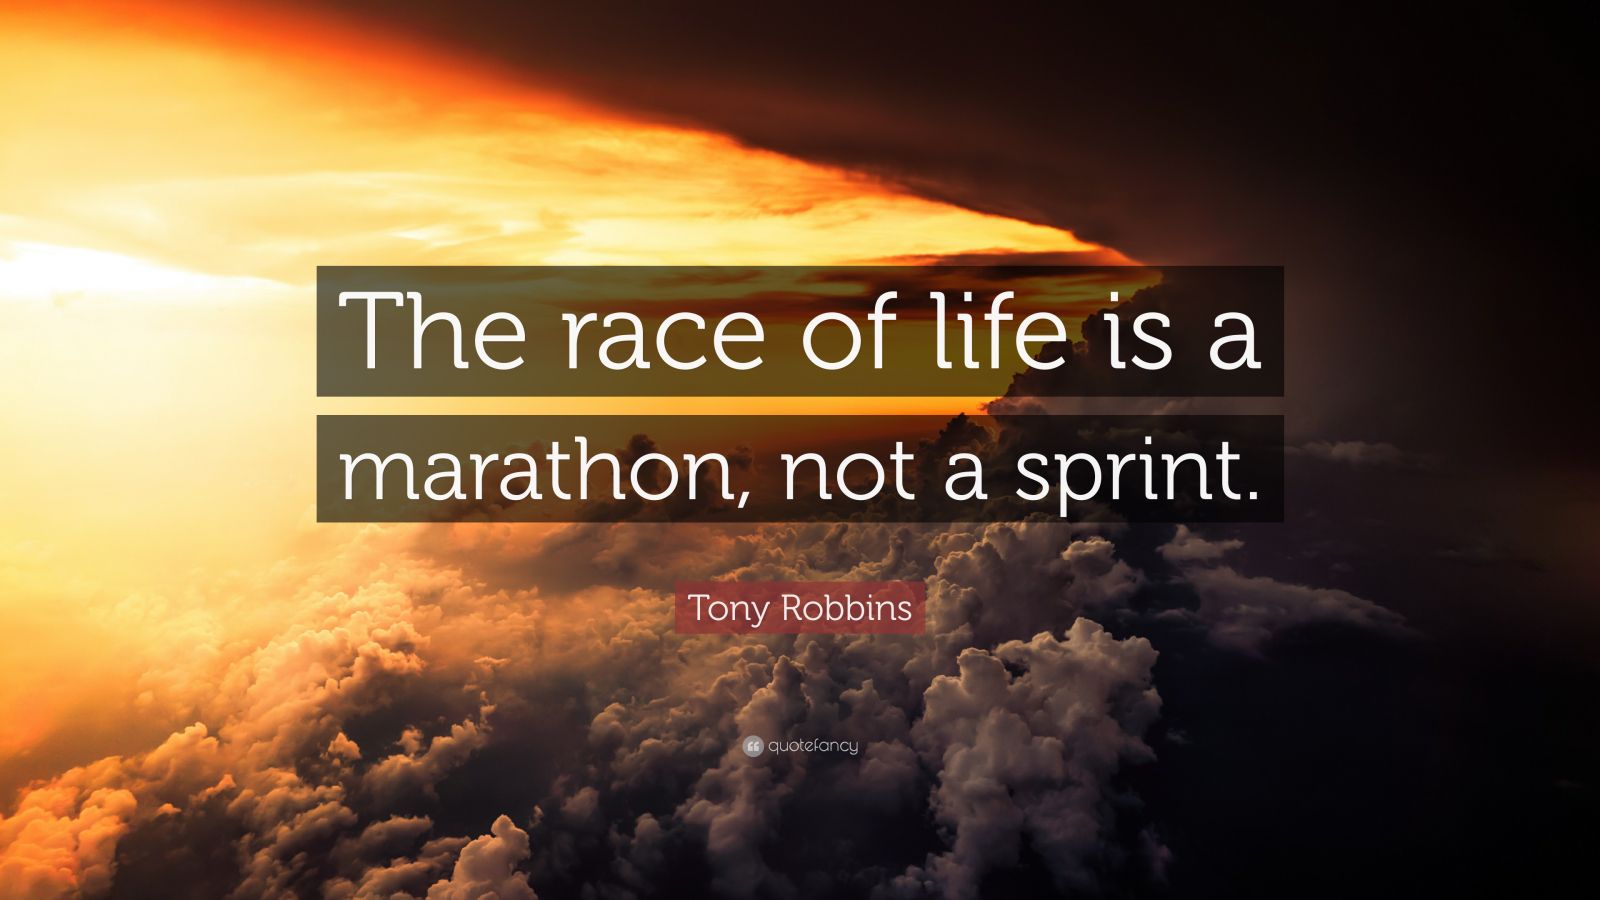 Tony Robbins Quote: “The race of life is a marathon, not a sprint.” (12